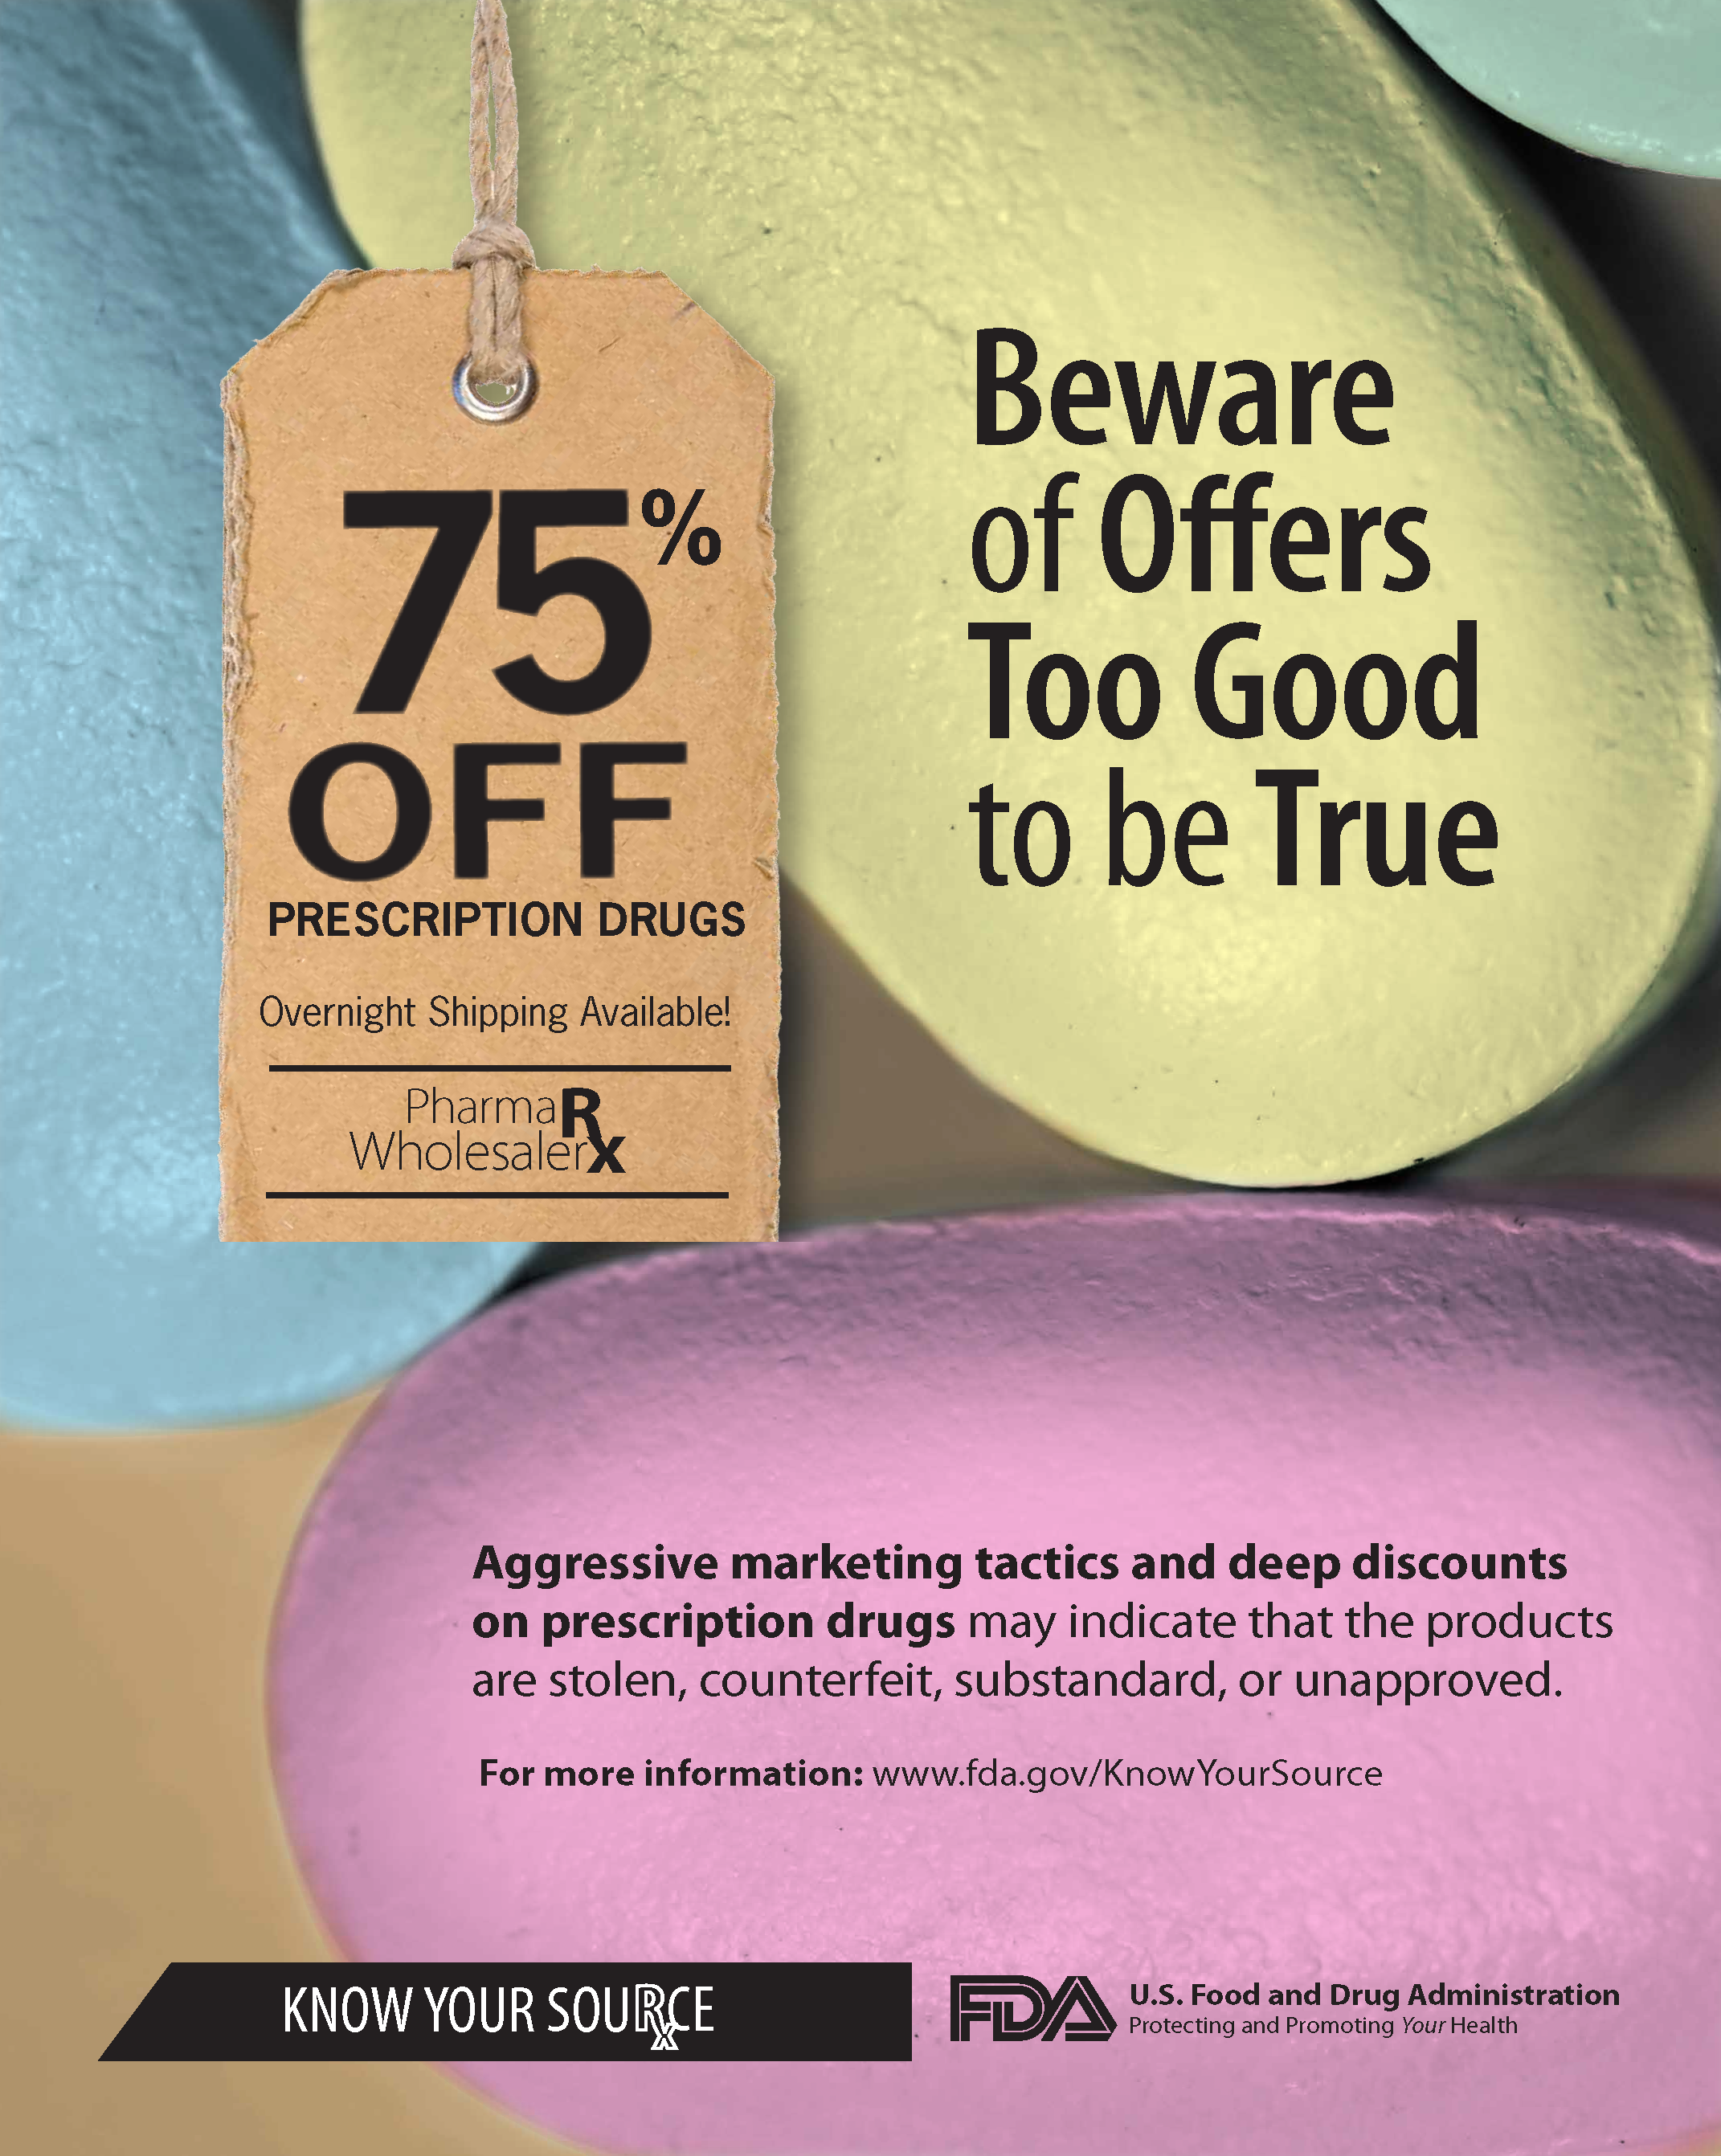 Beware of Offers Too Good to be True flyer